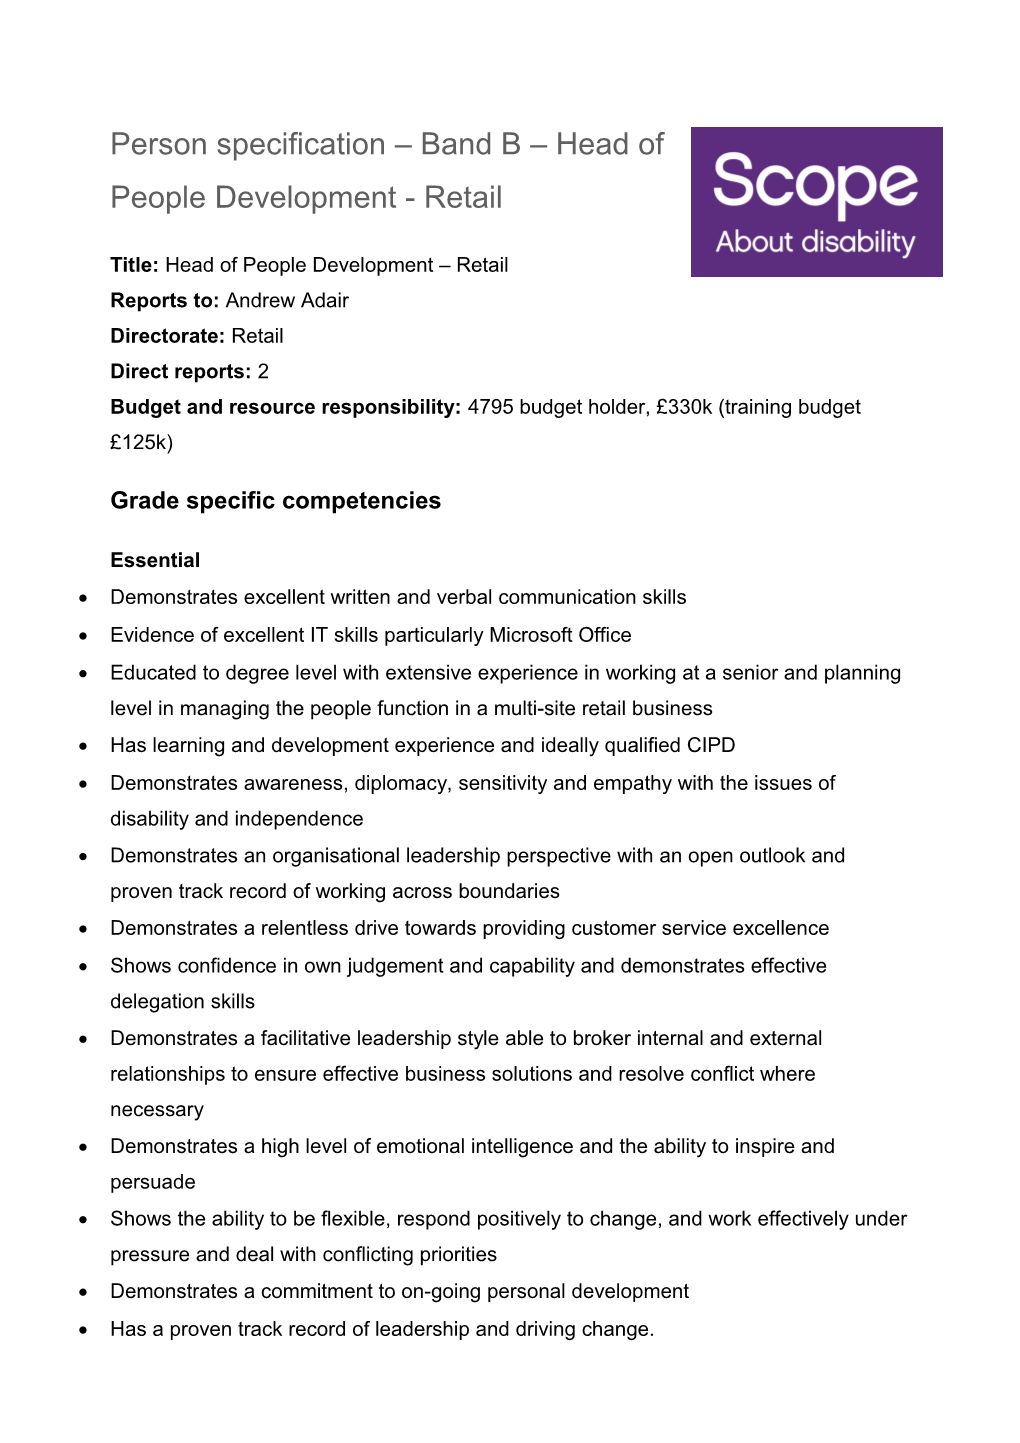 Person Specification Band B Head of People Development - Retail